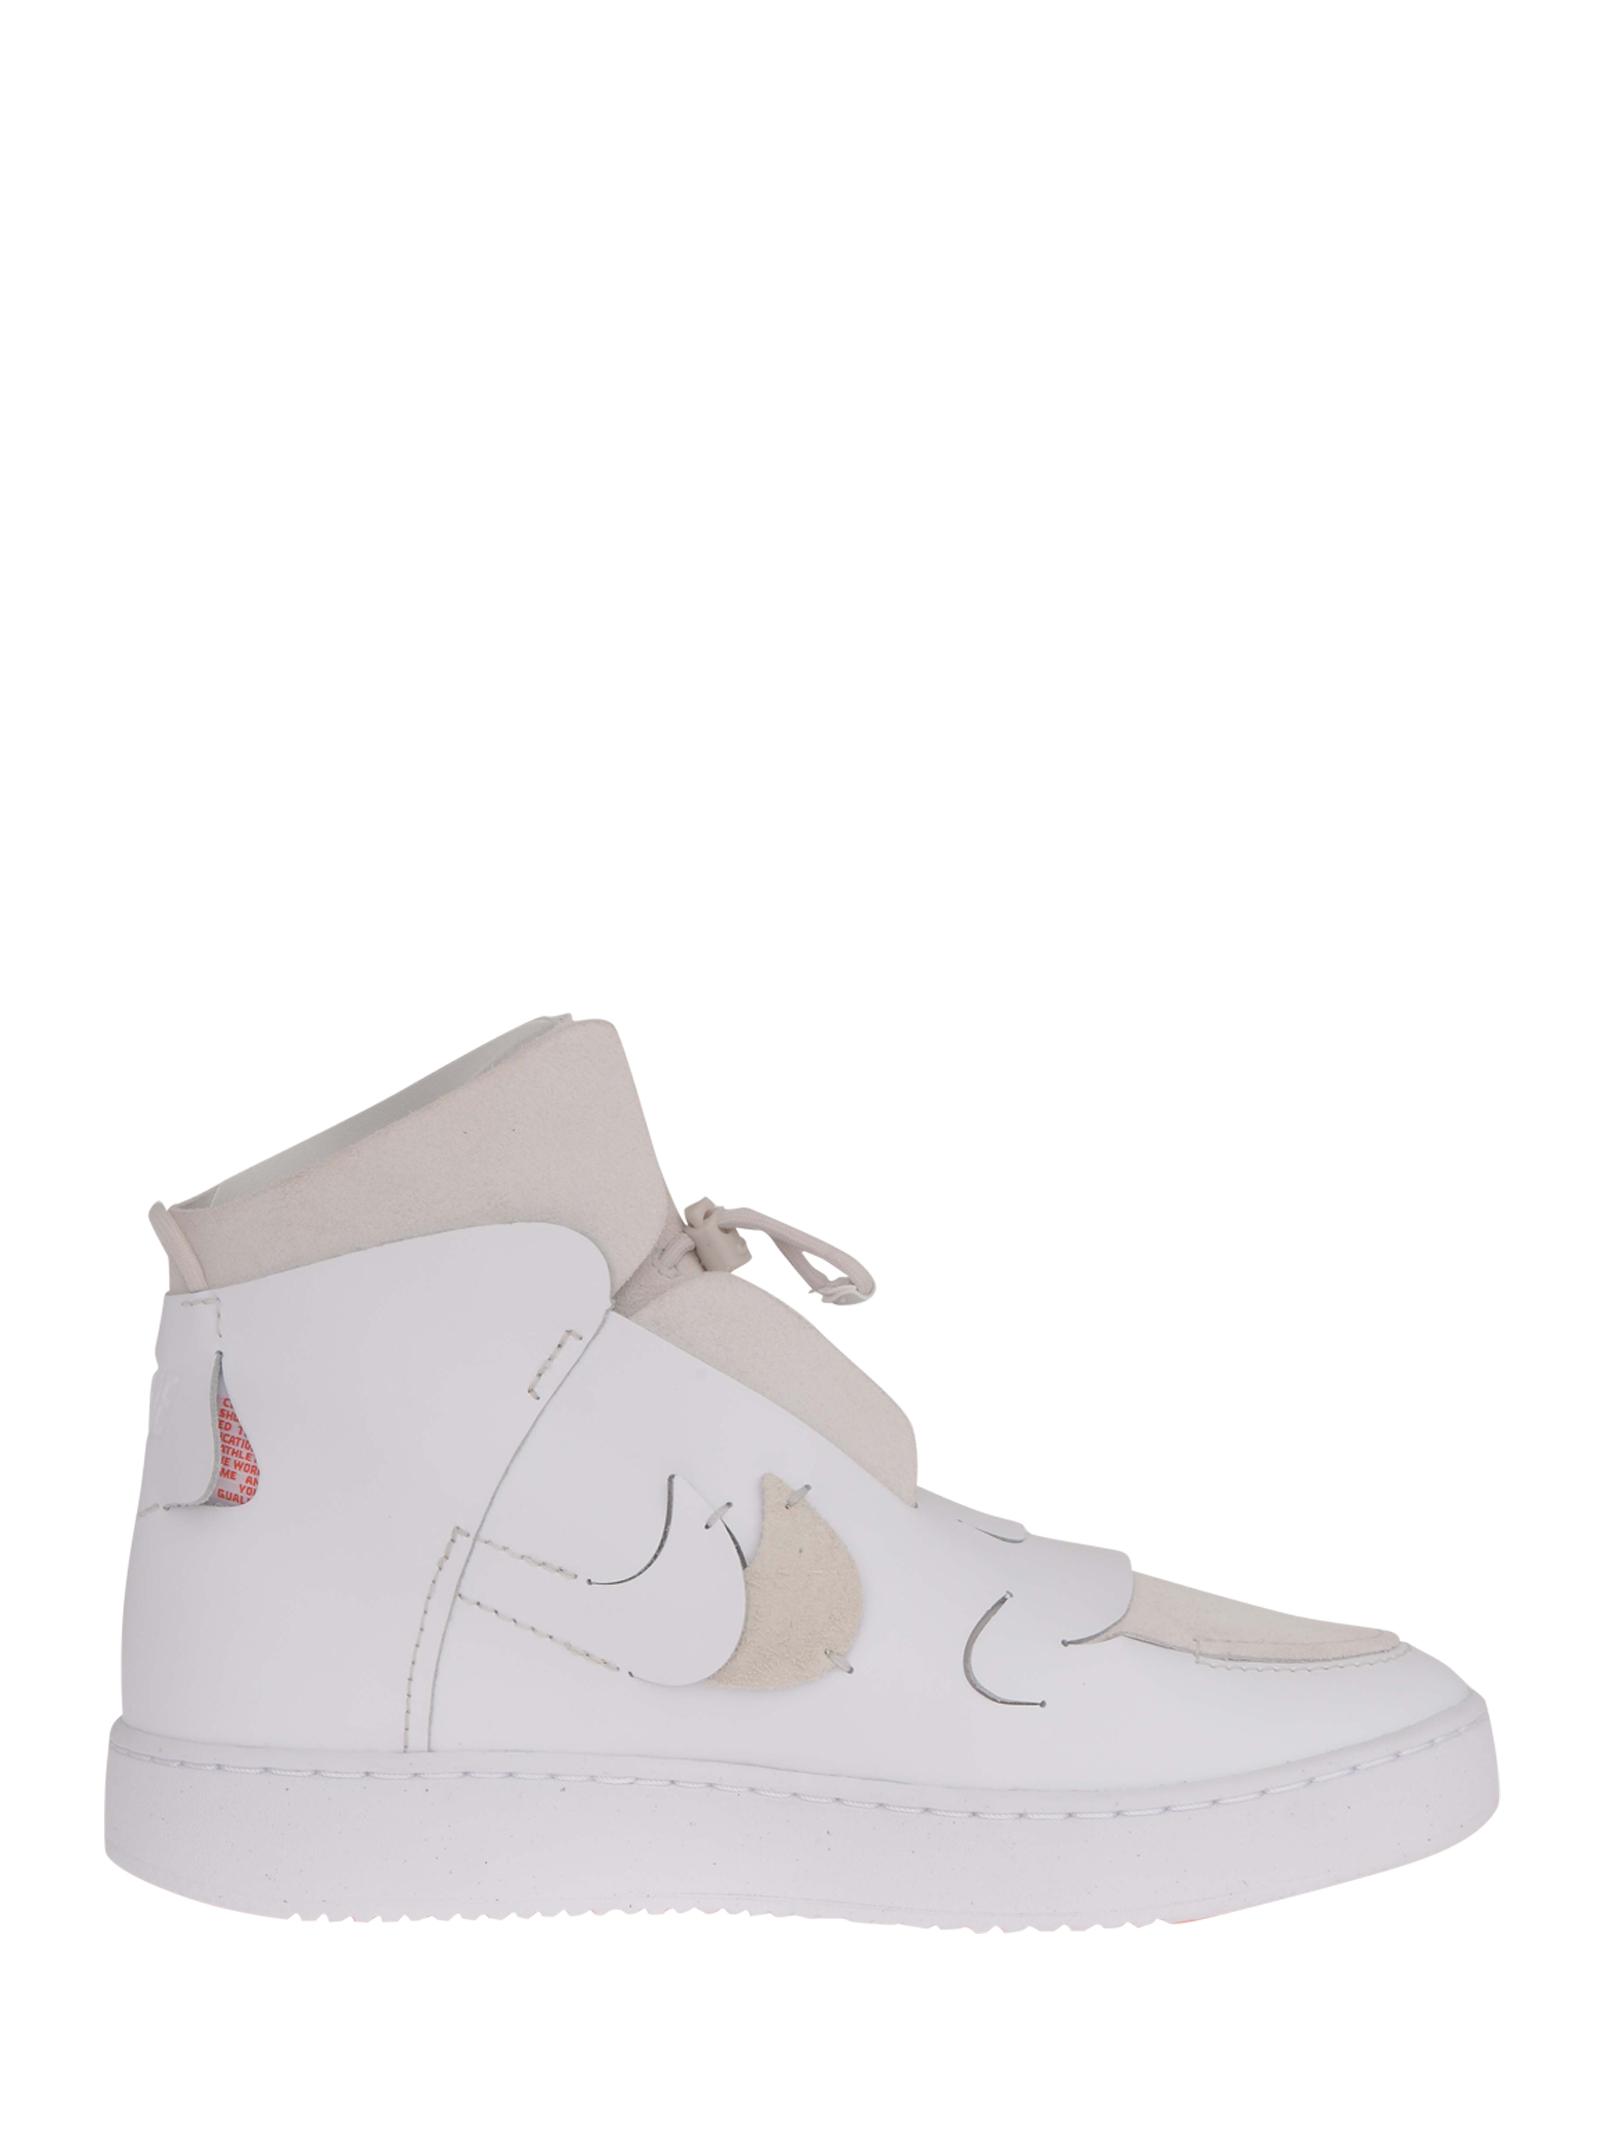 Nike Vandalised Lx High-top Sneakers In White Leather And Beige Suede With  Drawstring Closure. - Lyst